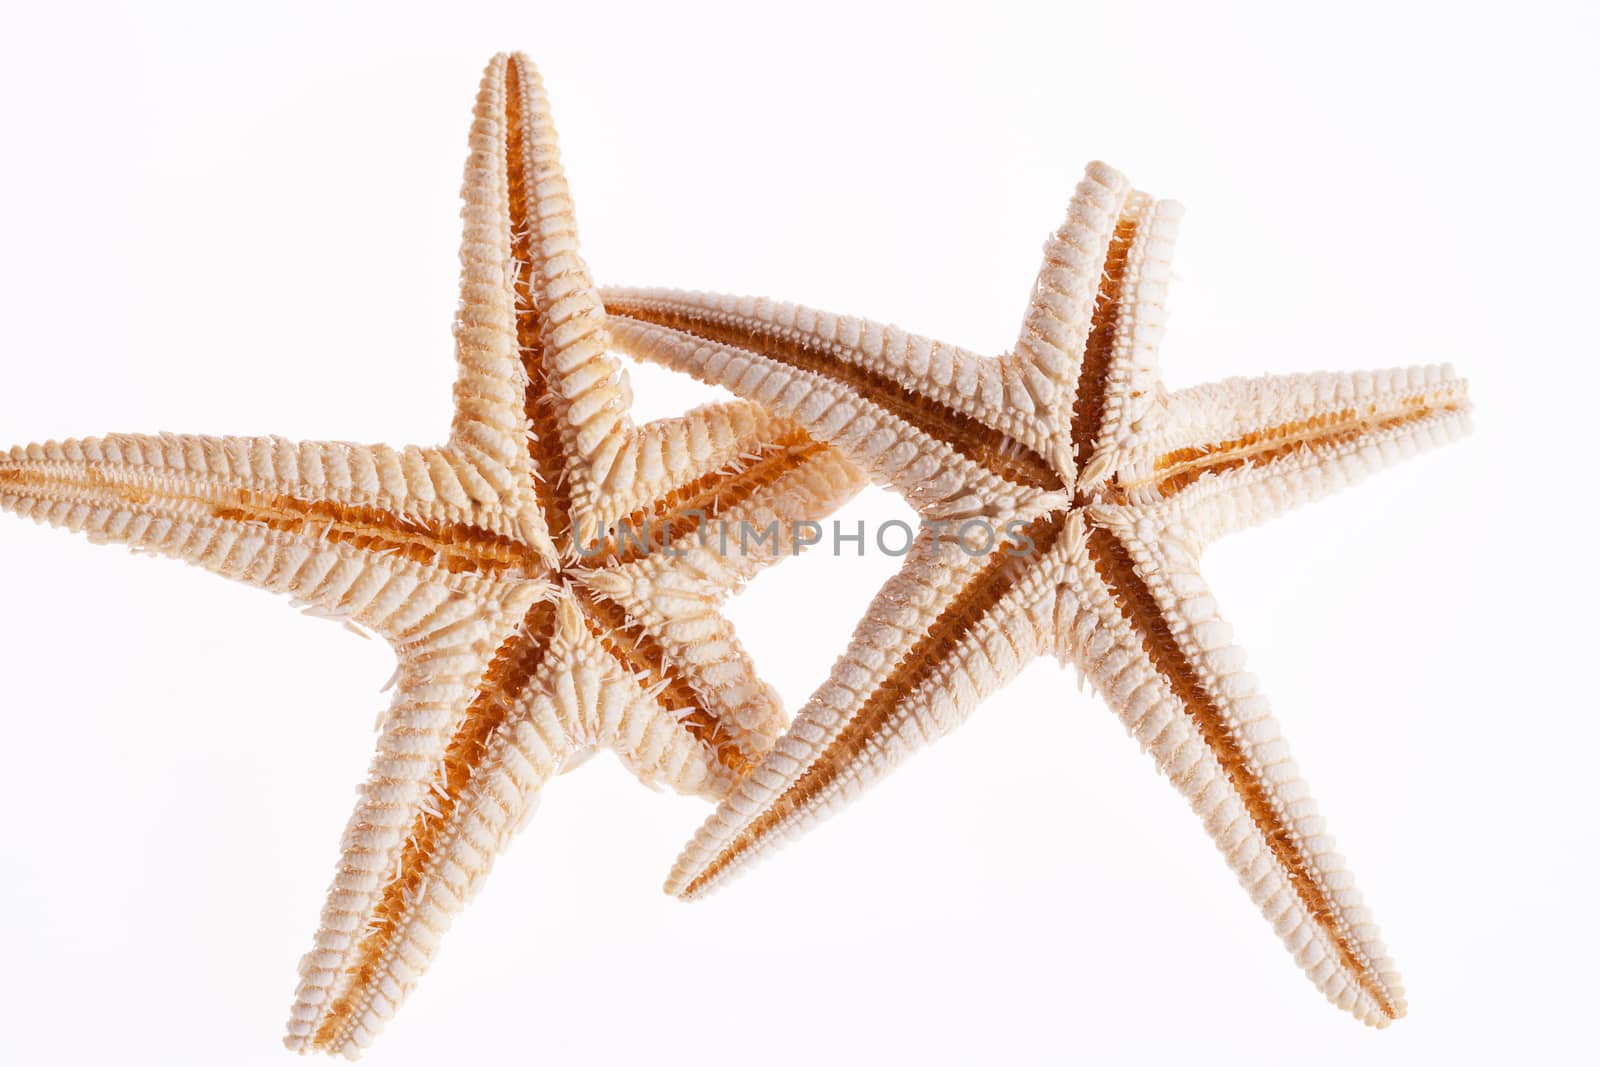 some of sea stars isolated on white background by mychadre77